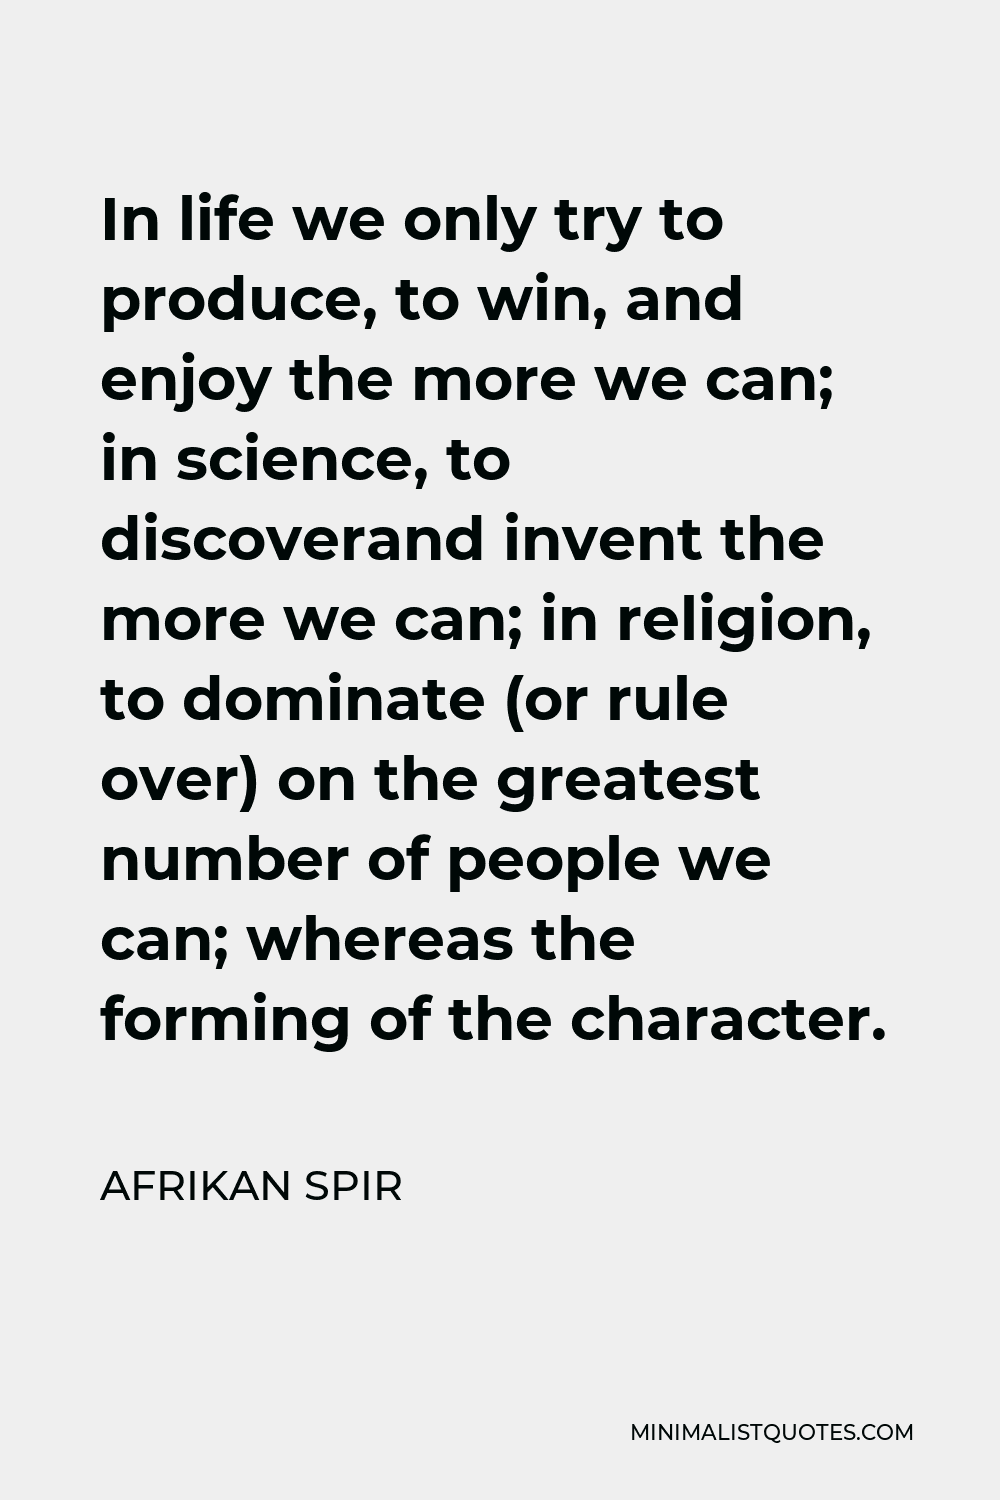 Afrikan Spir Quote - In life we only try to produce, to win, and enjoy the more we can; in science, to discoverand invent the more we can; in religion, to dominate (or rule over) on the greatest number of people we can; whereas the forming of the character.